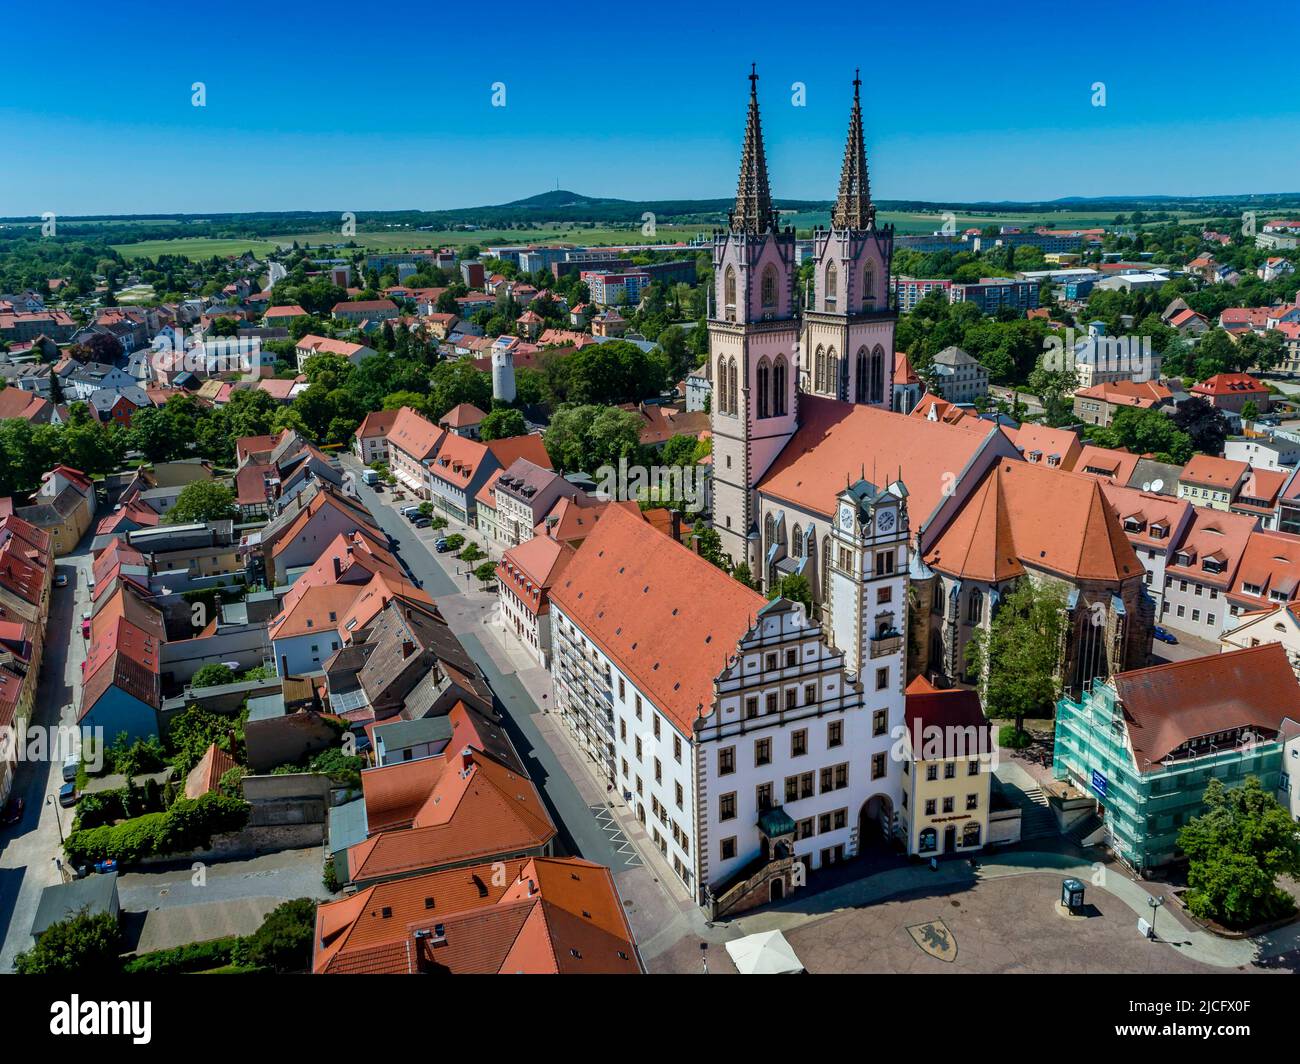 Markt Oschatz: Oschatz is located in a hilly area in the valley of the Döllnitz, which flows into the Elbe as a left tributary about 15 km further east near Riesa. Stock Photo